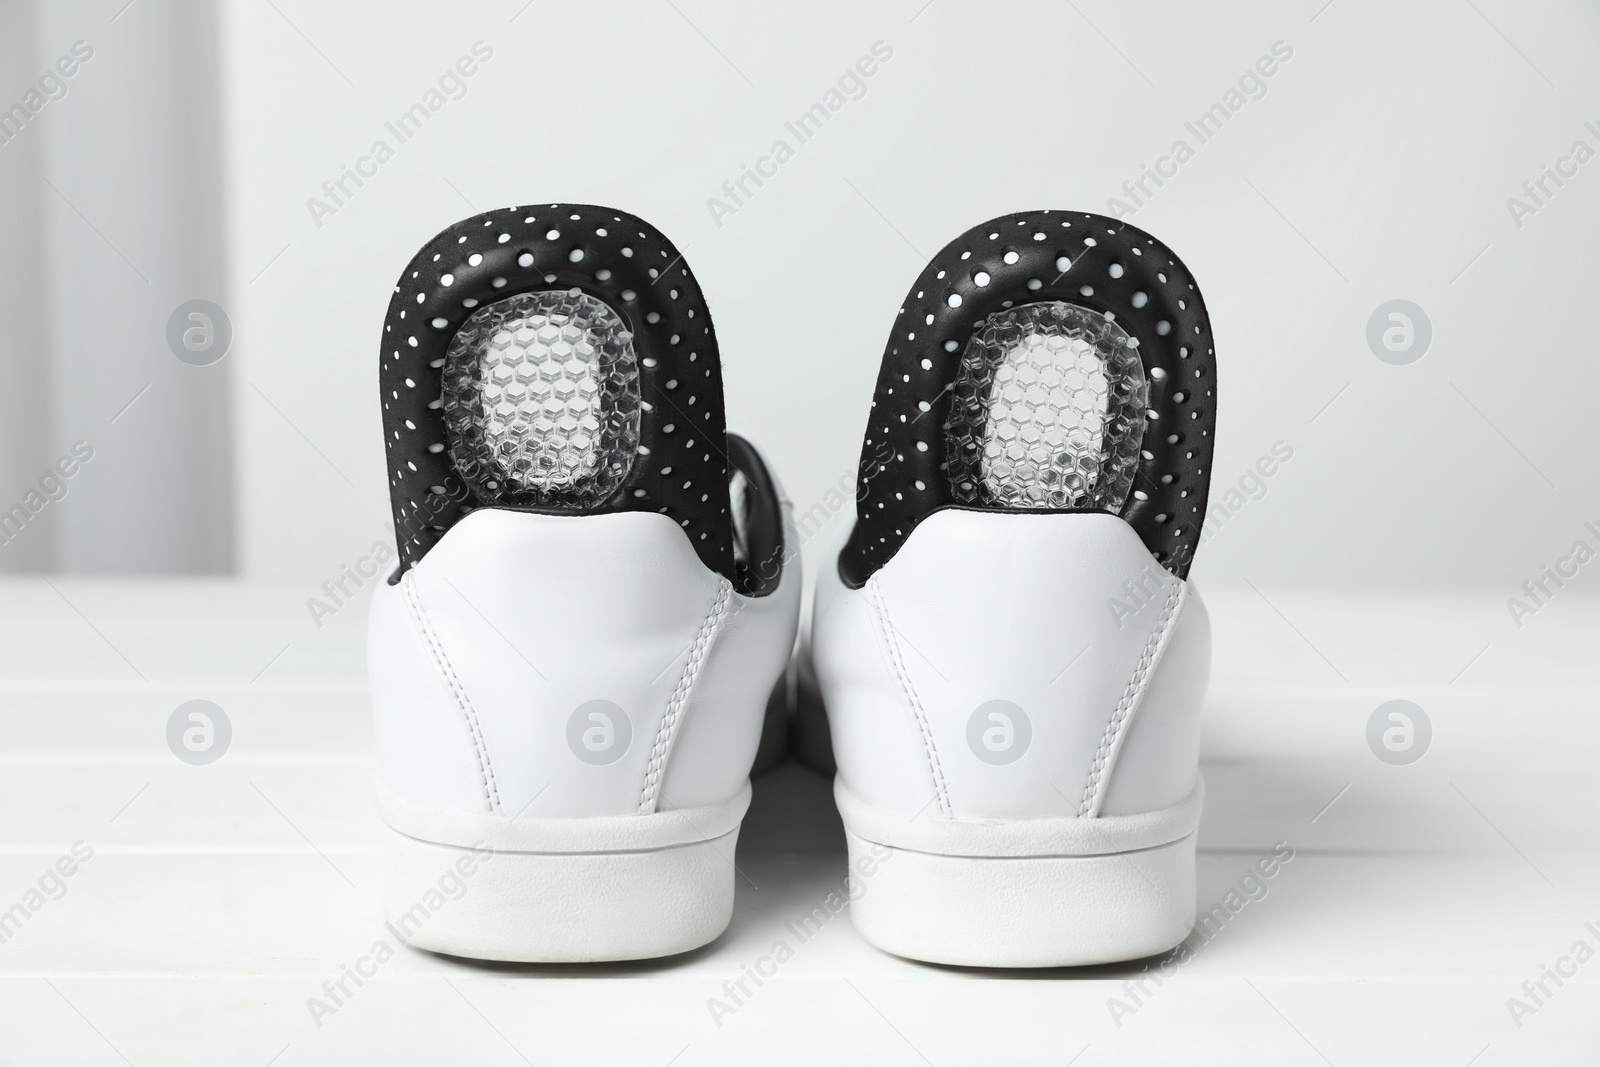 Photo of Orthopedic insoles in shoes on white wooden floor, closeup